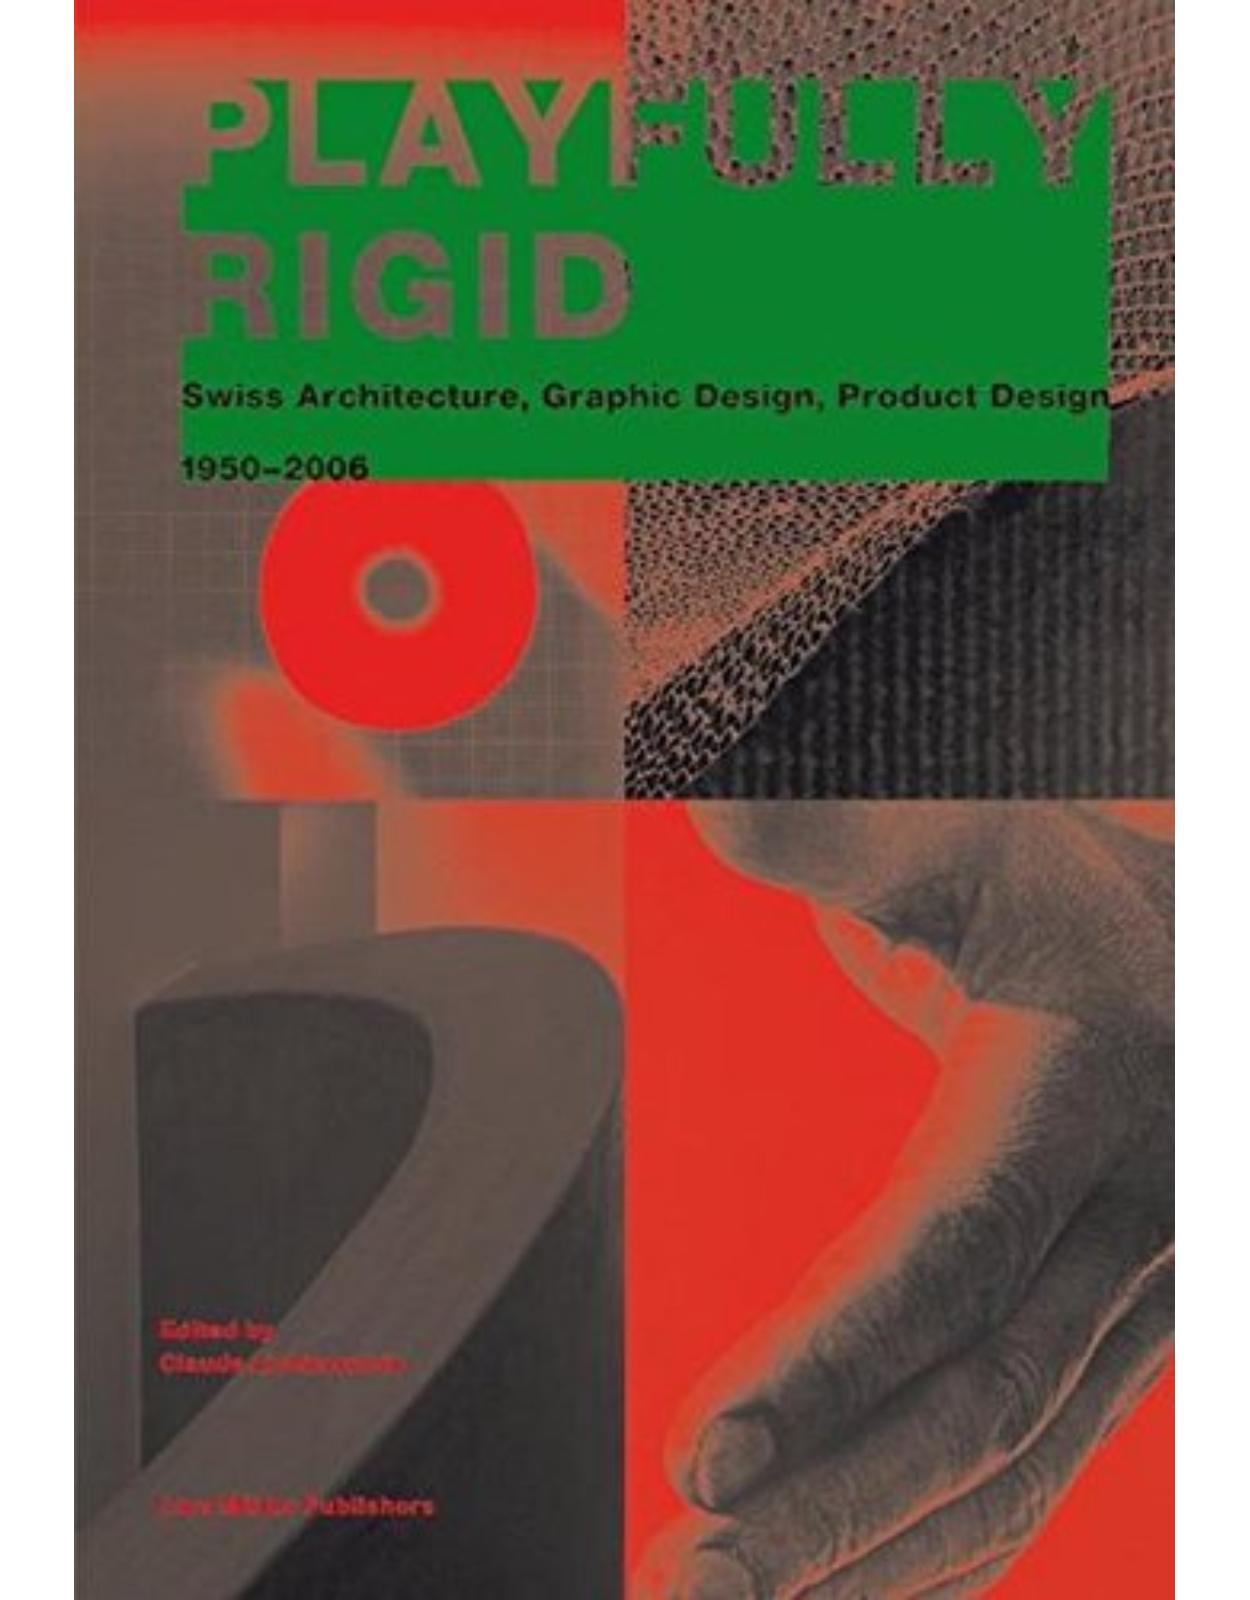 Playfully Rigid: Swiss Architecture, Graphic Design, Product Design 1950-2006